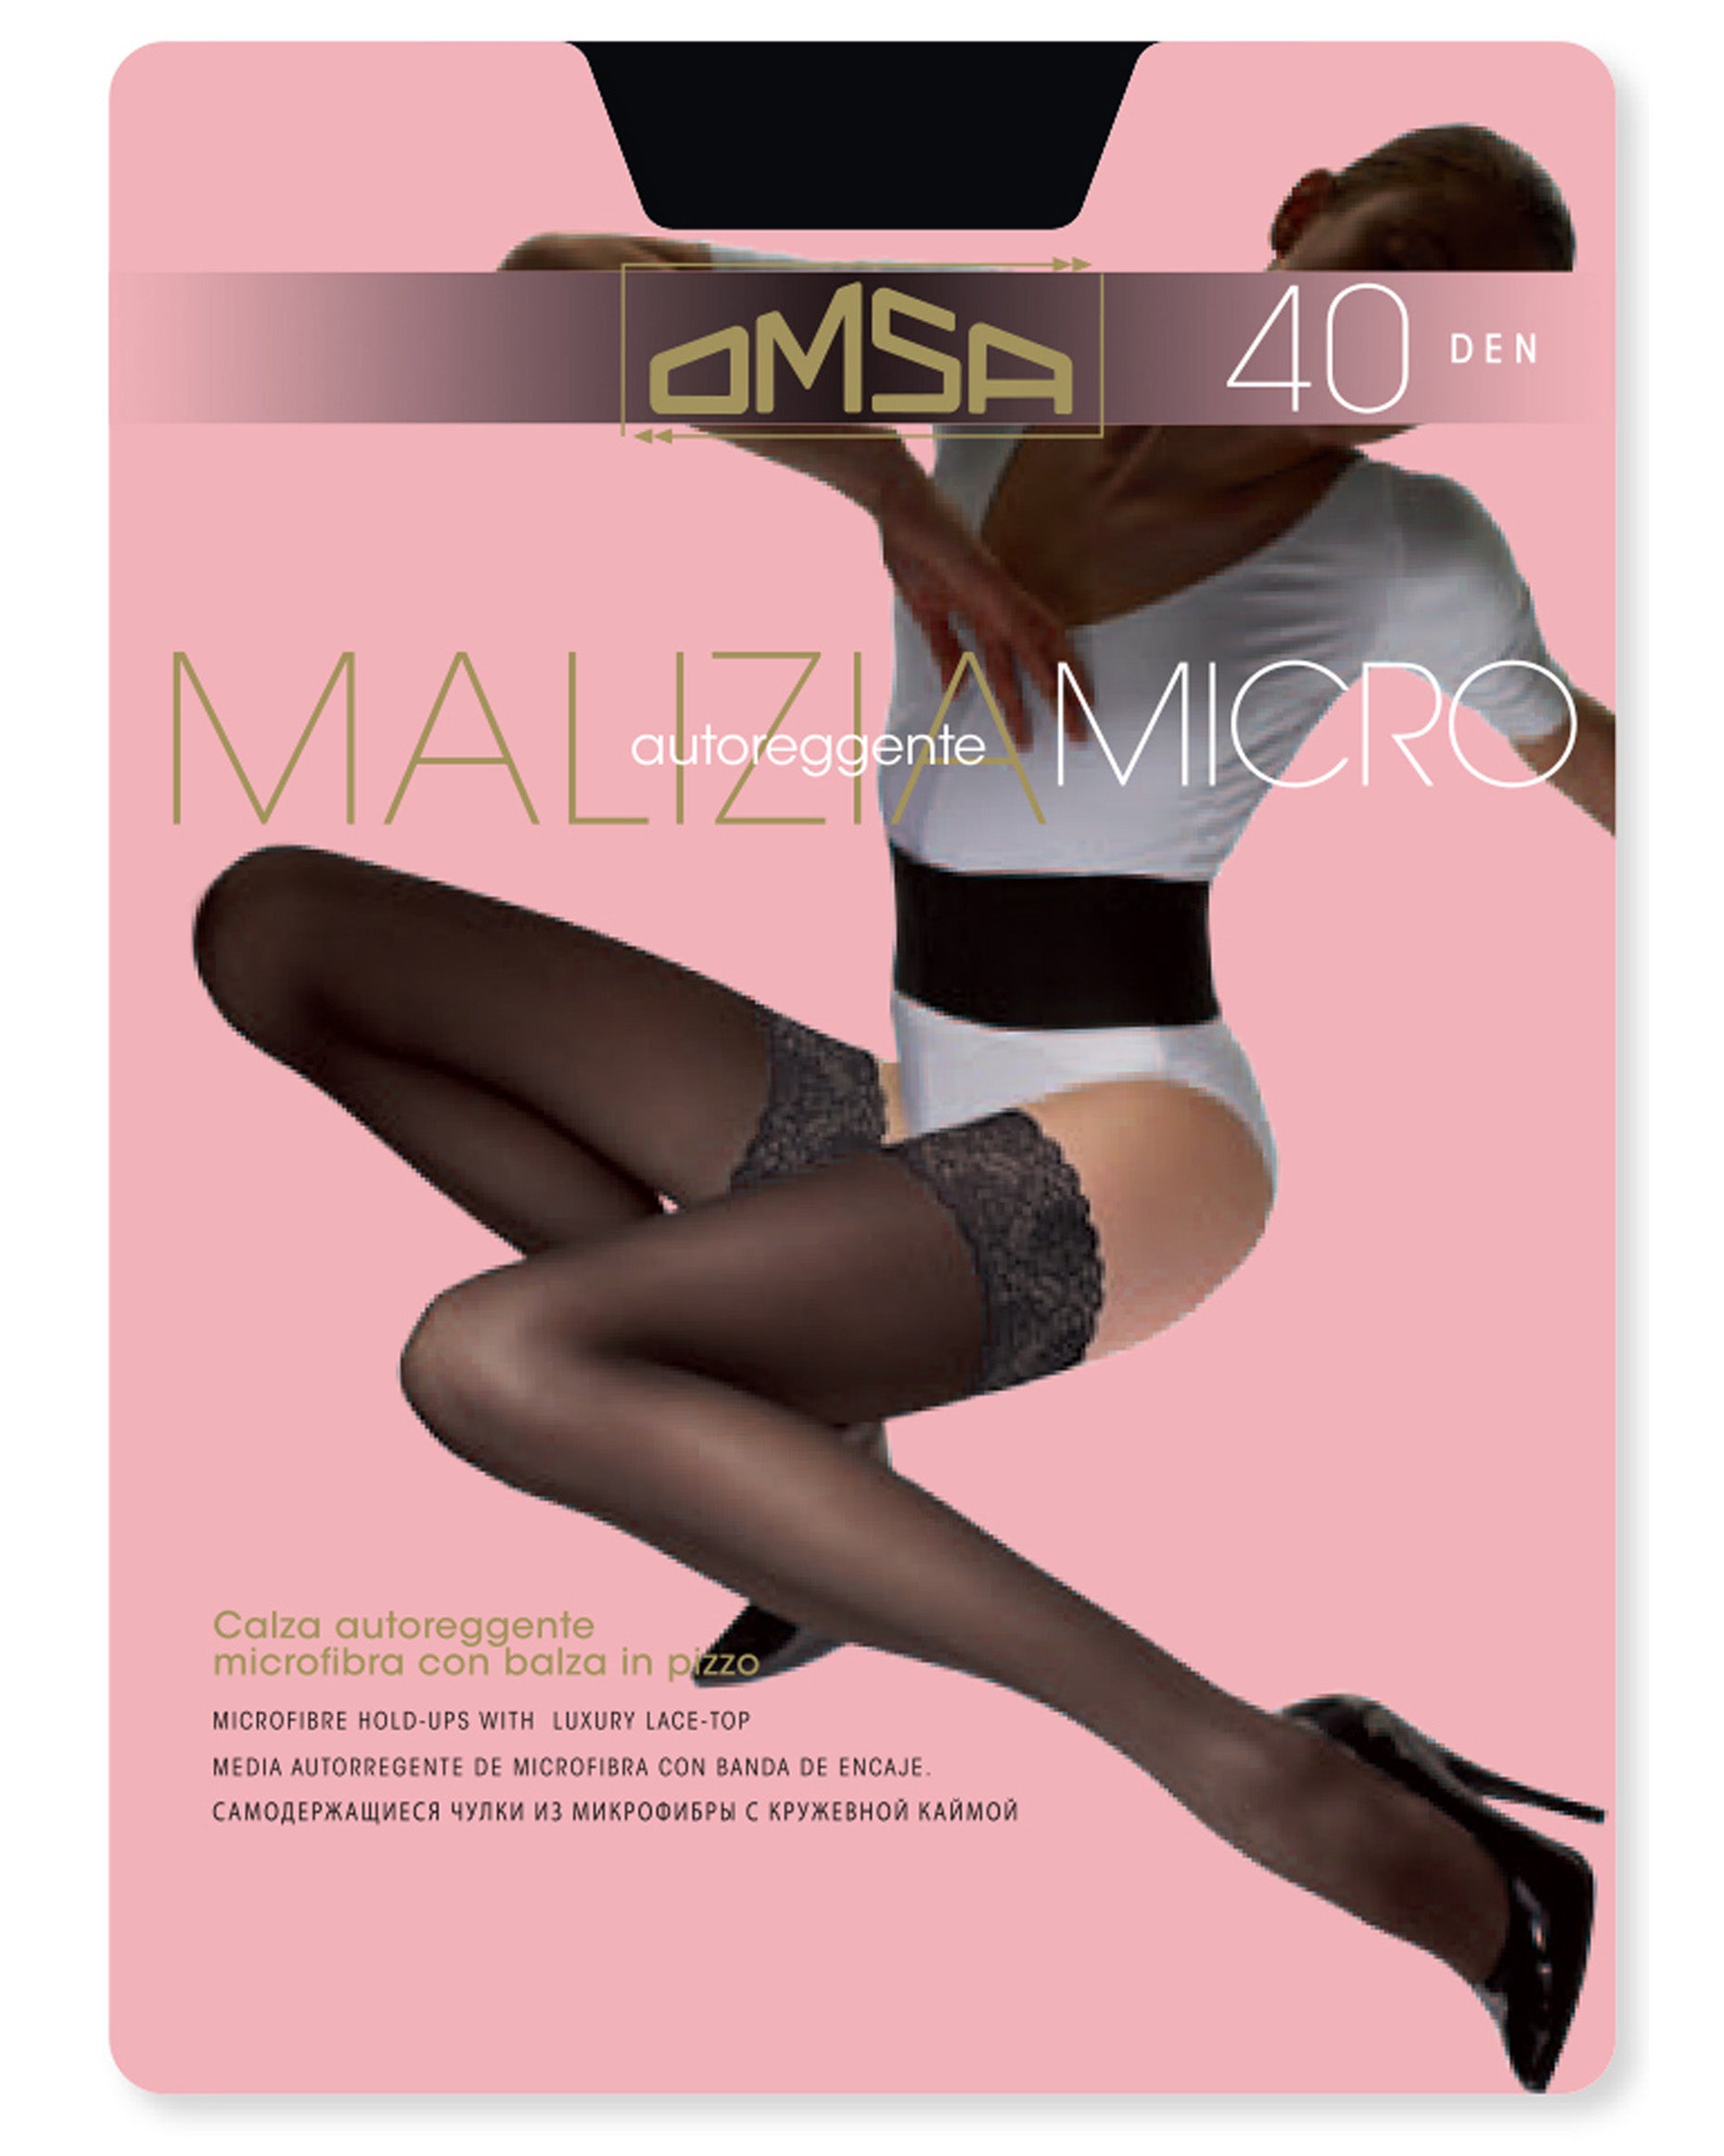 Omsa Malizia 40 Autoreggente Pack - classic matte opaque hold ups with lace top and silicone.